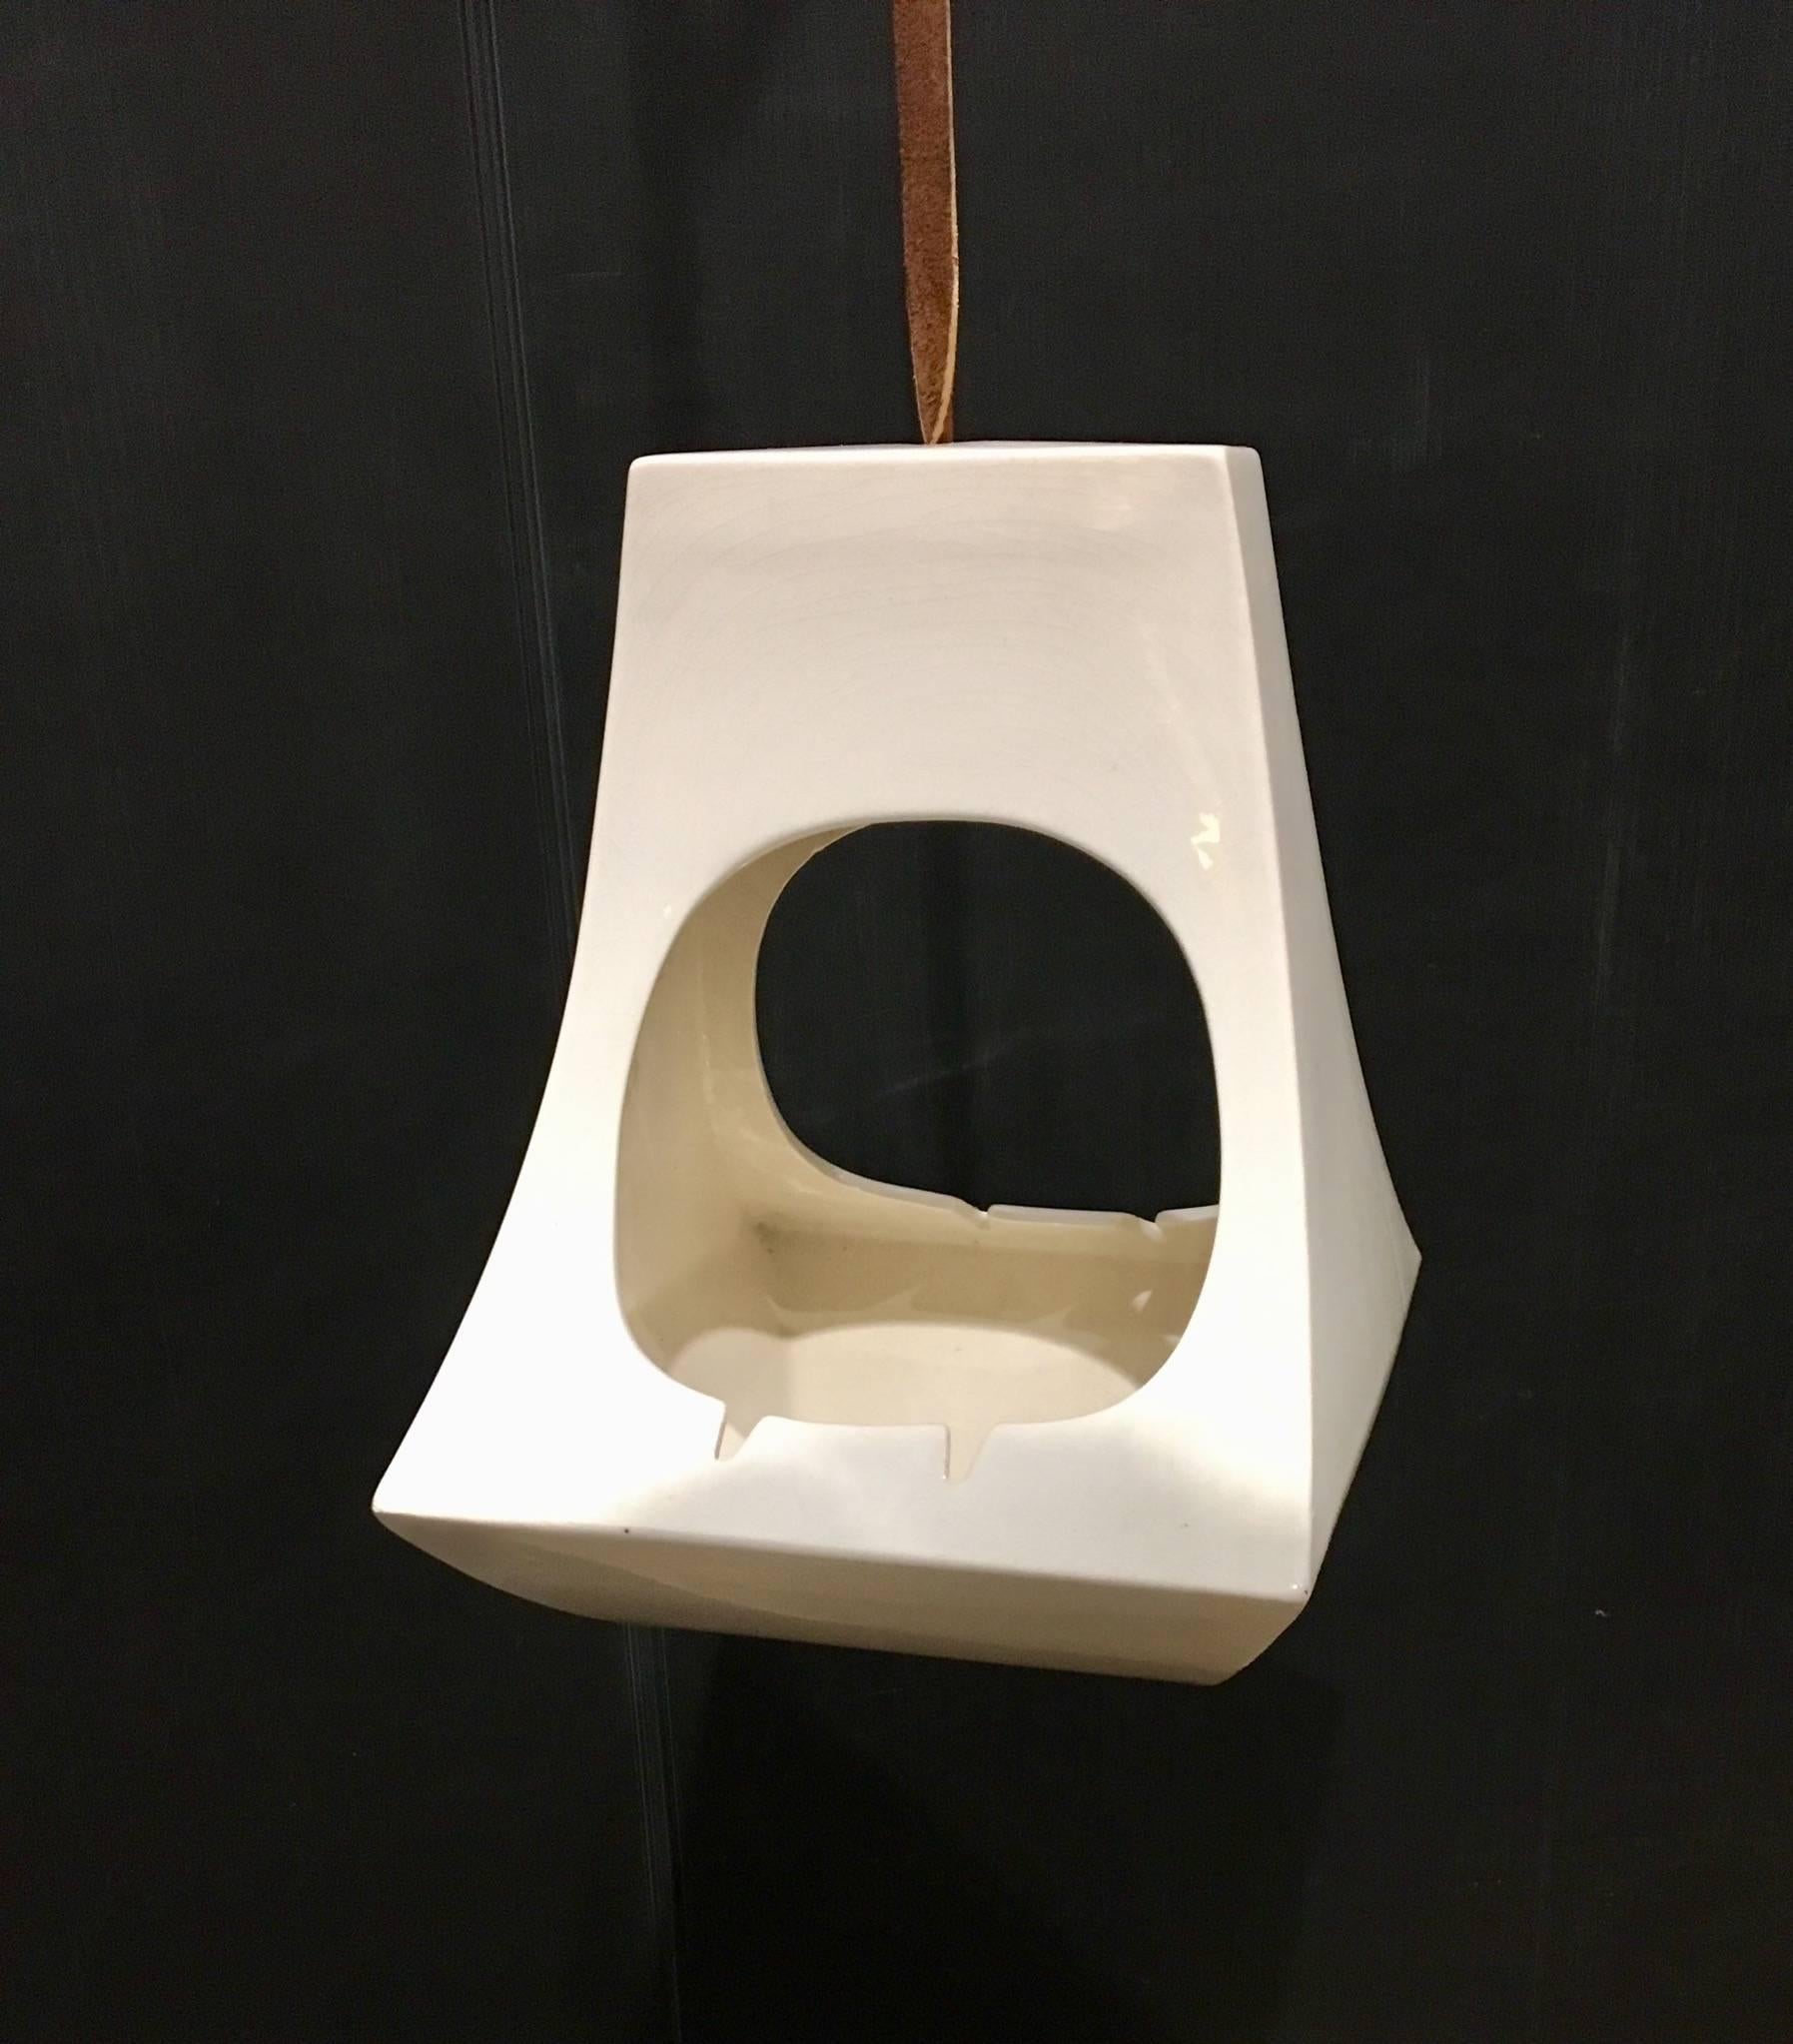 Cool 1960s ceramic hanging ashtray, bird feeder or planter in cream color with leather strap, nice condition and great shape.